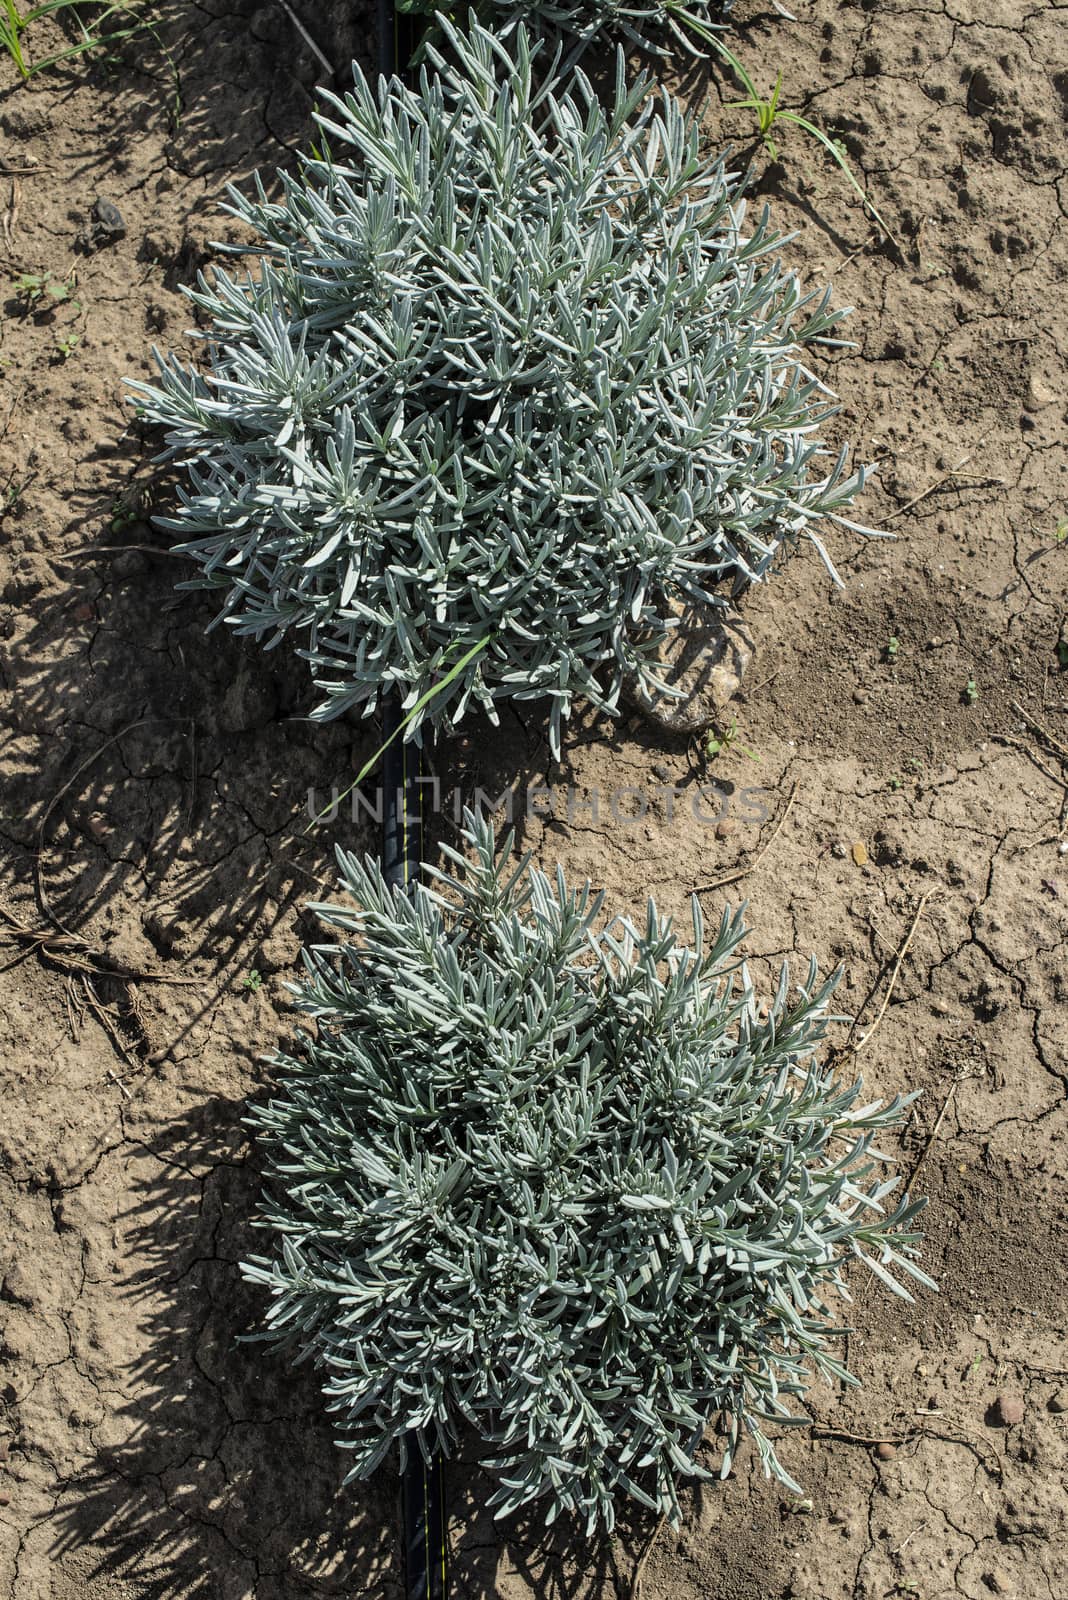 Lavandula small green plants. Newly planted lavandula. Industrialy growing lavender in rows. Small green bushes.